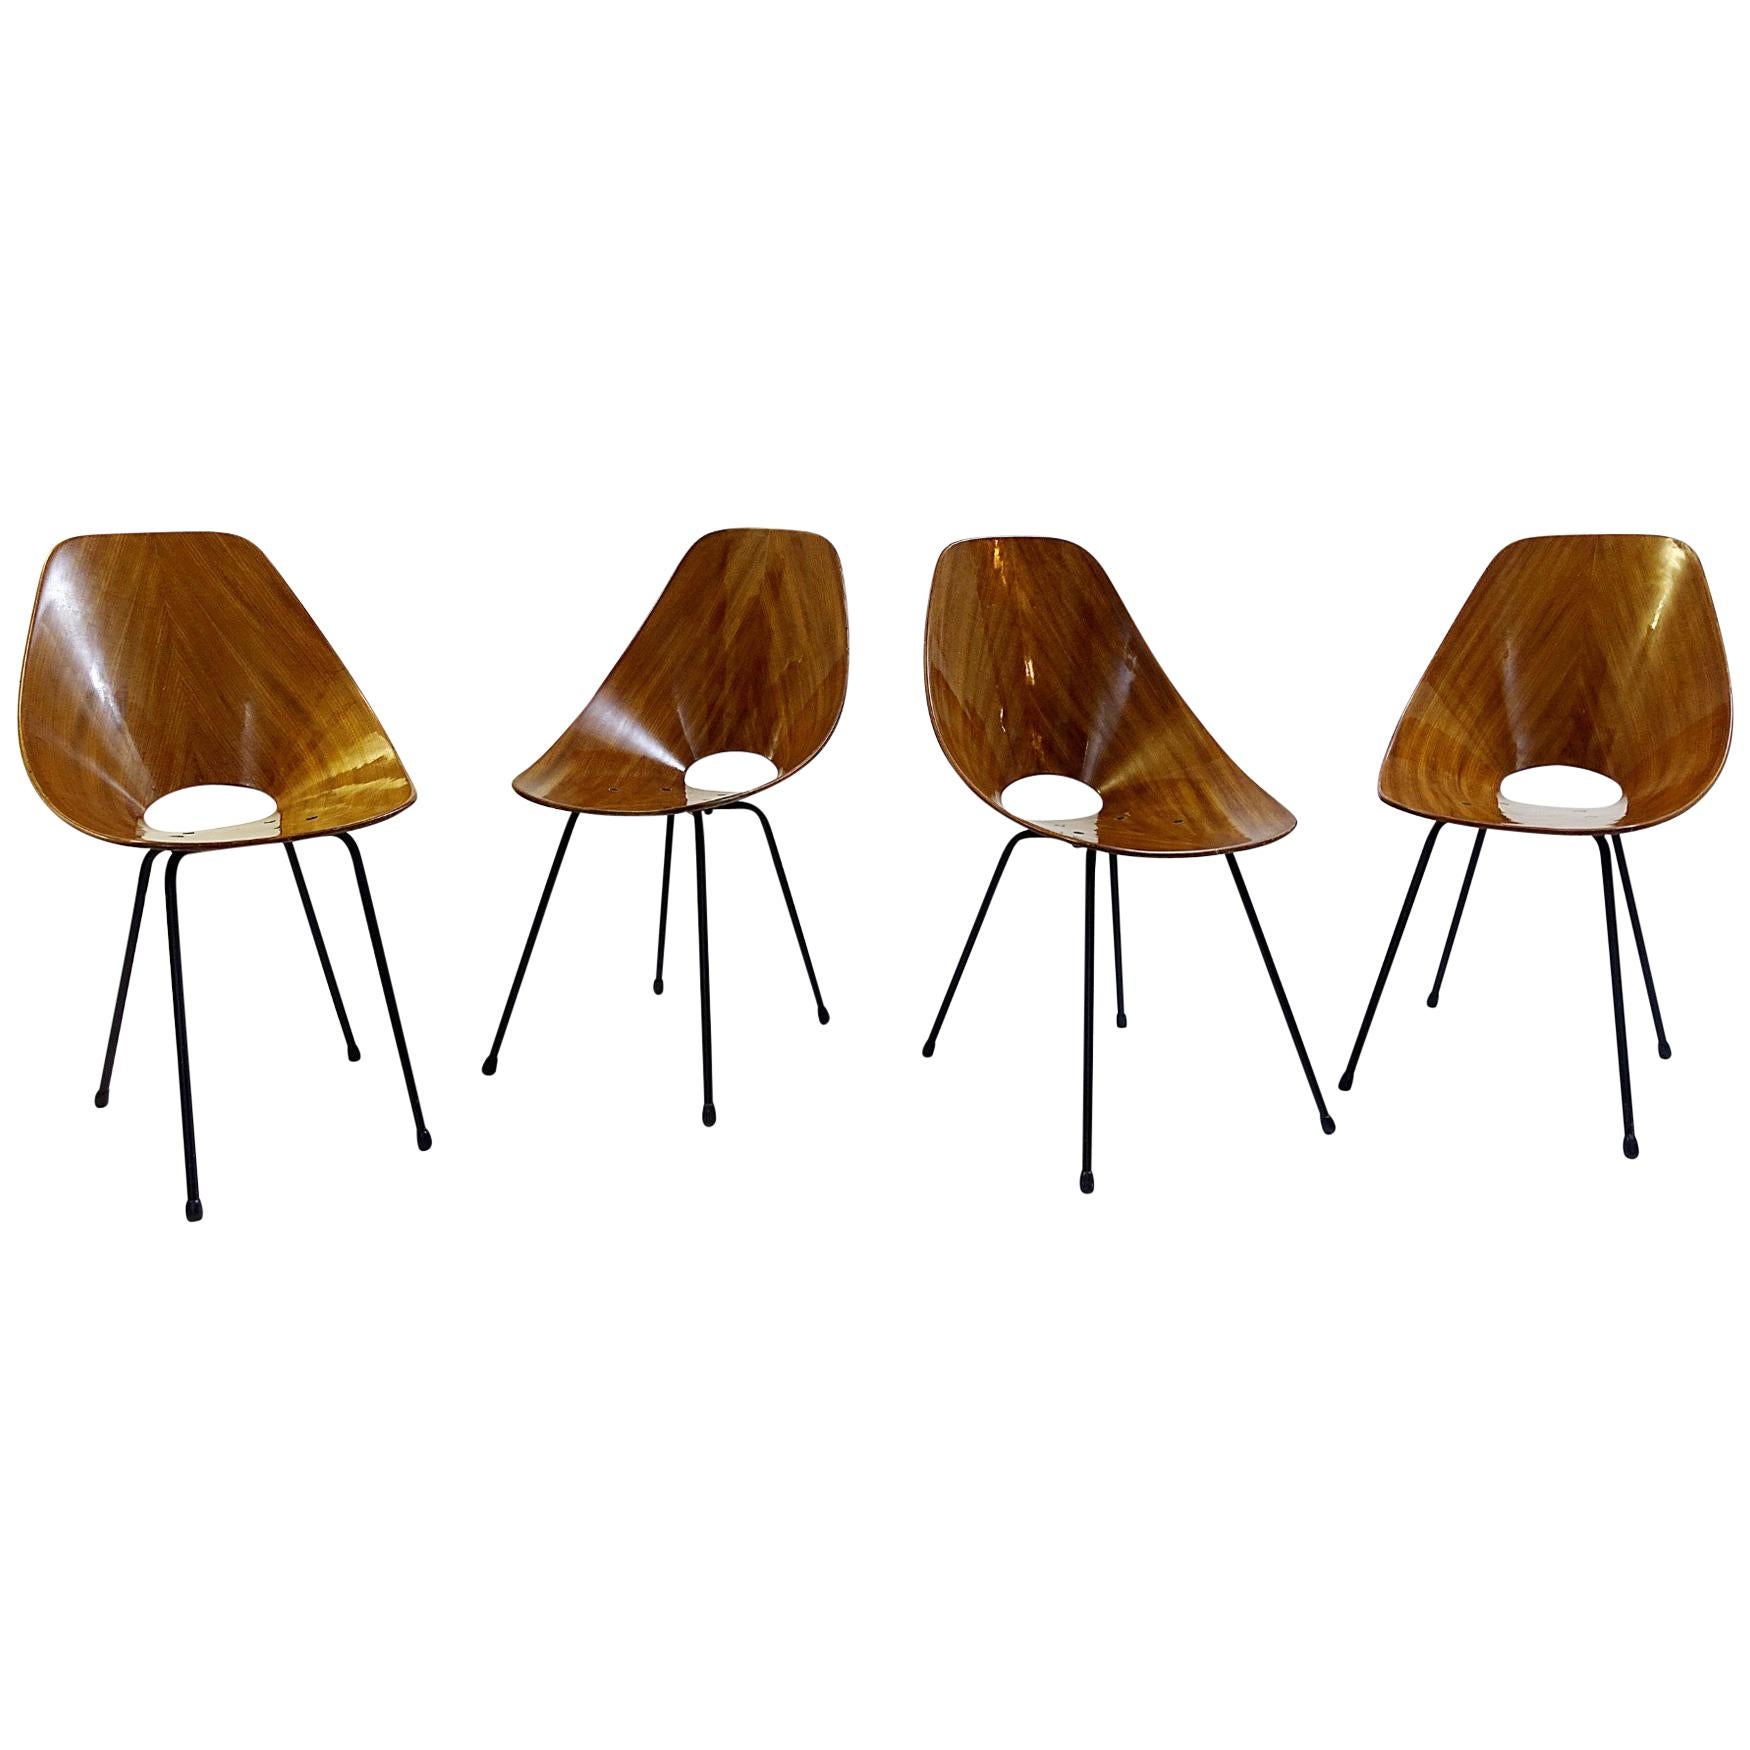 Set of Four Medea Chairs by Vittorio Nobili for Fratelli Tagliabue